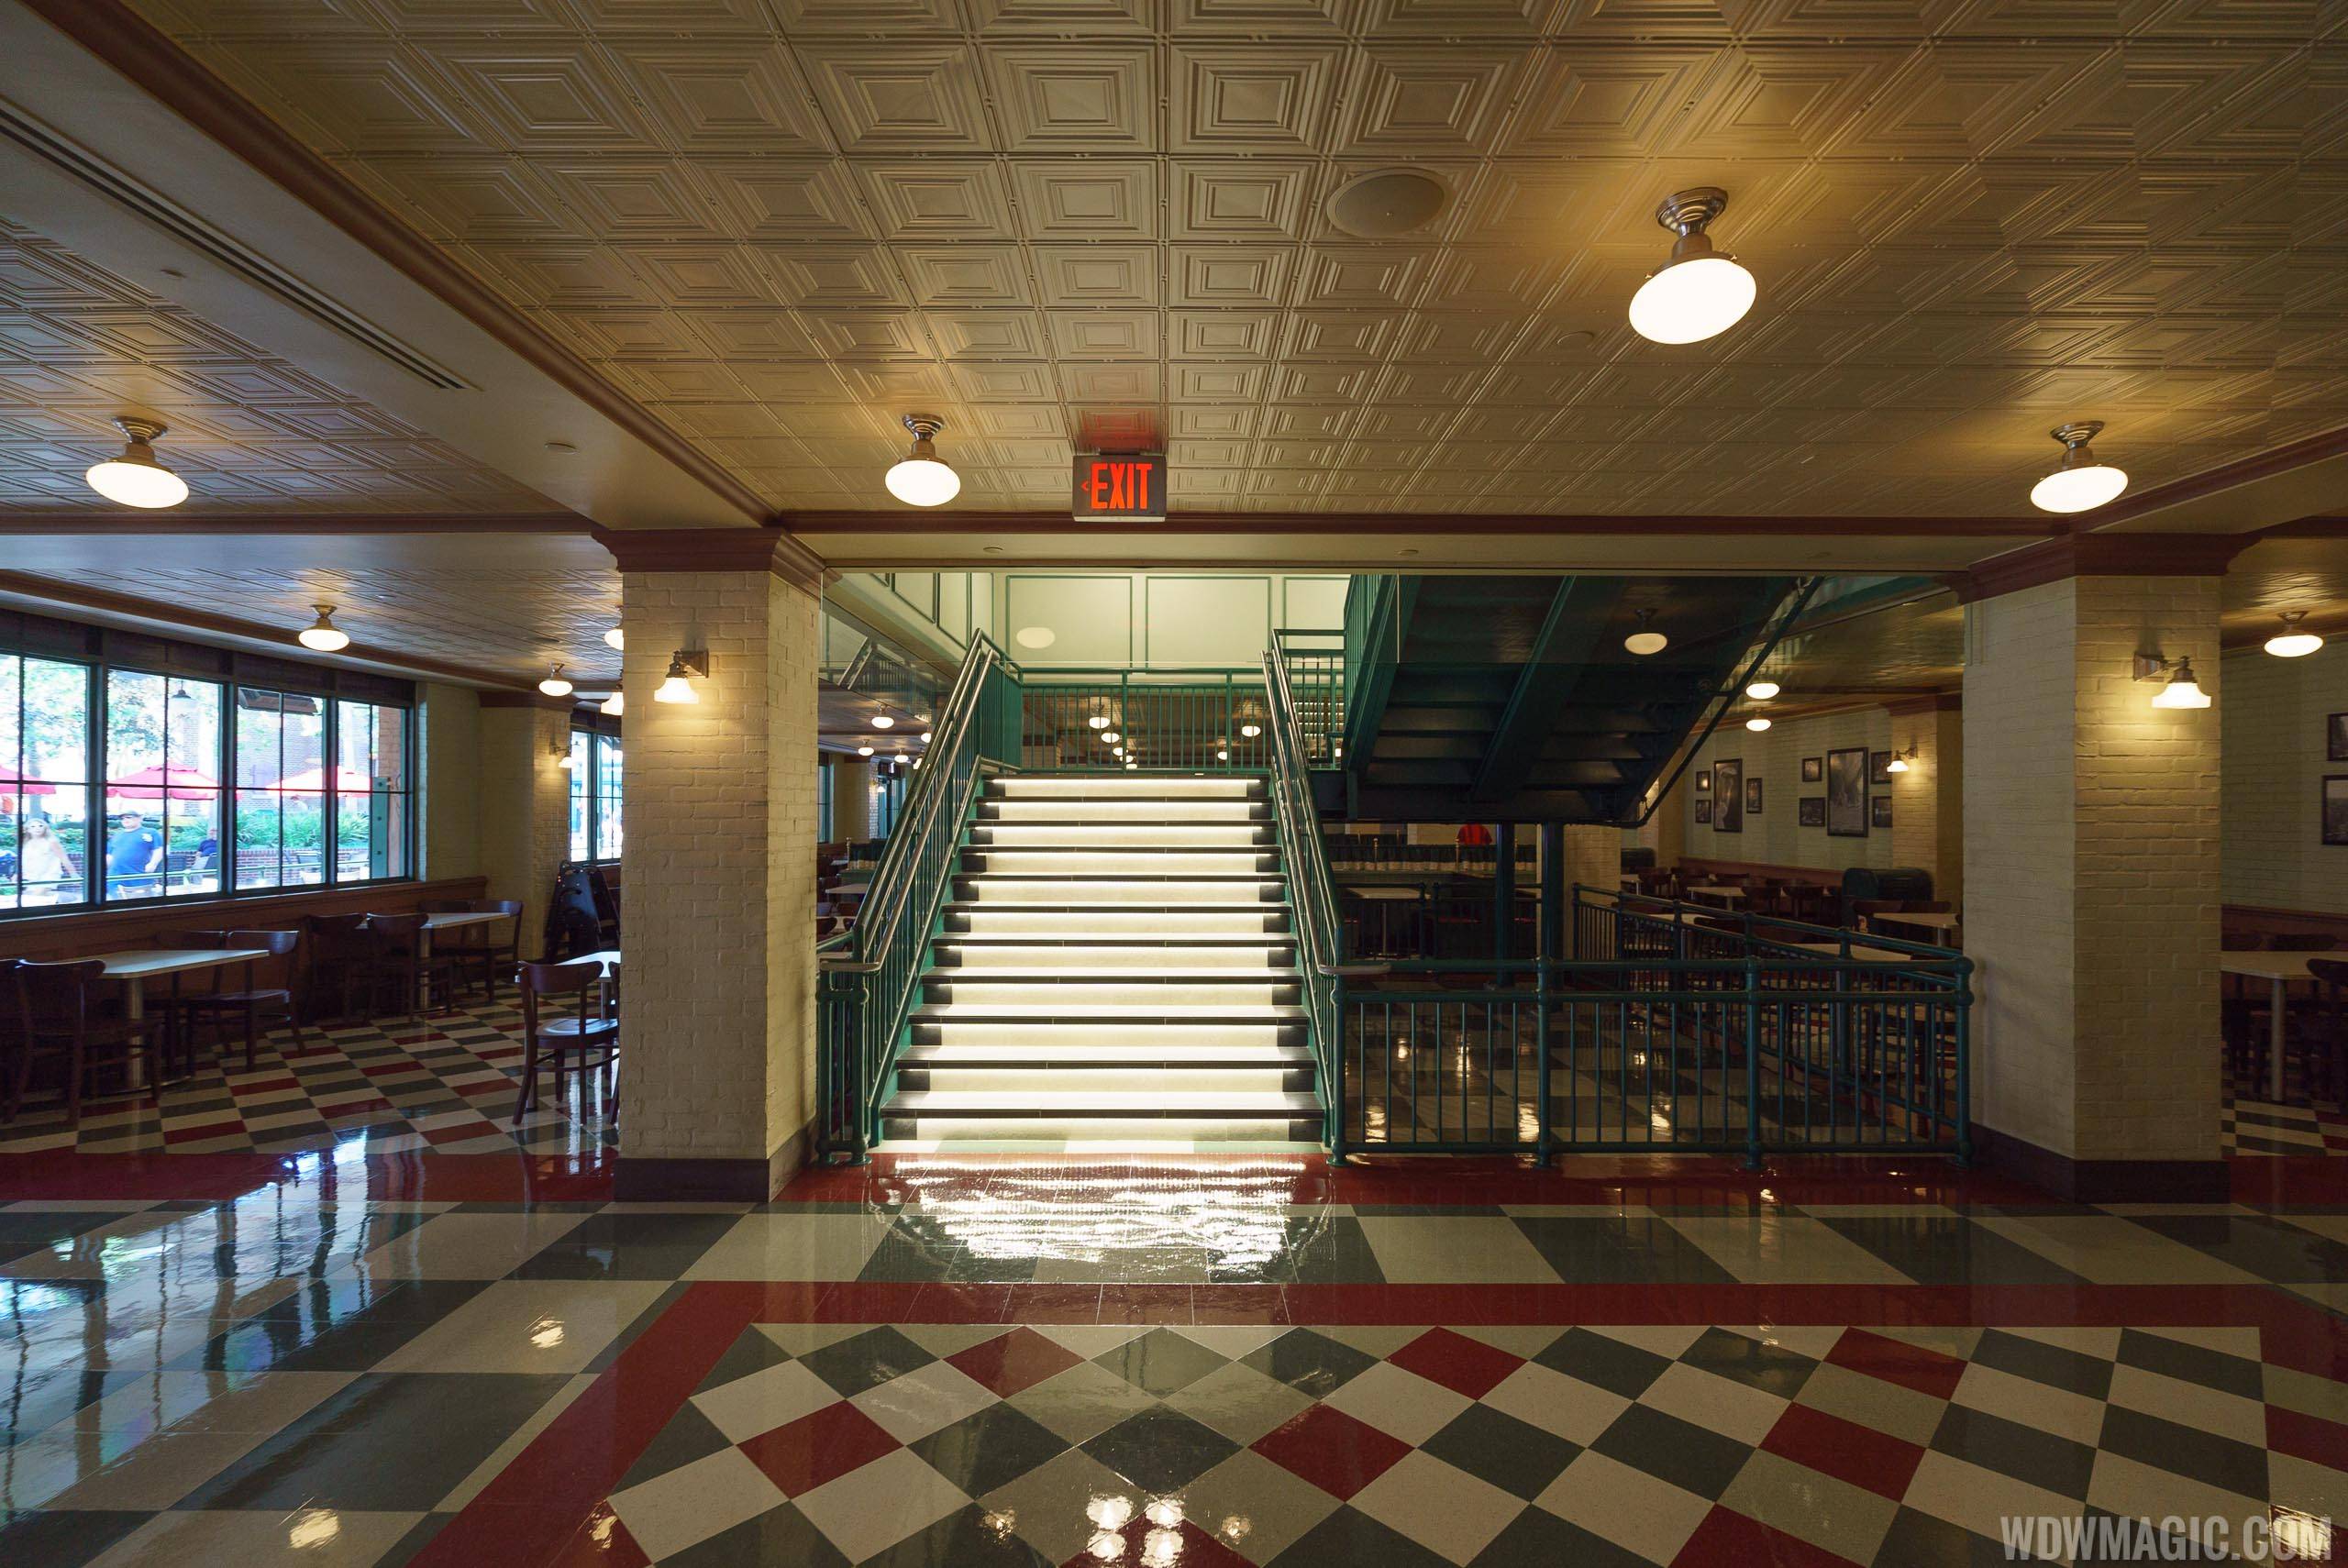 Inside PizzeRizzo - Staircase to the upper level dining room